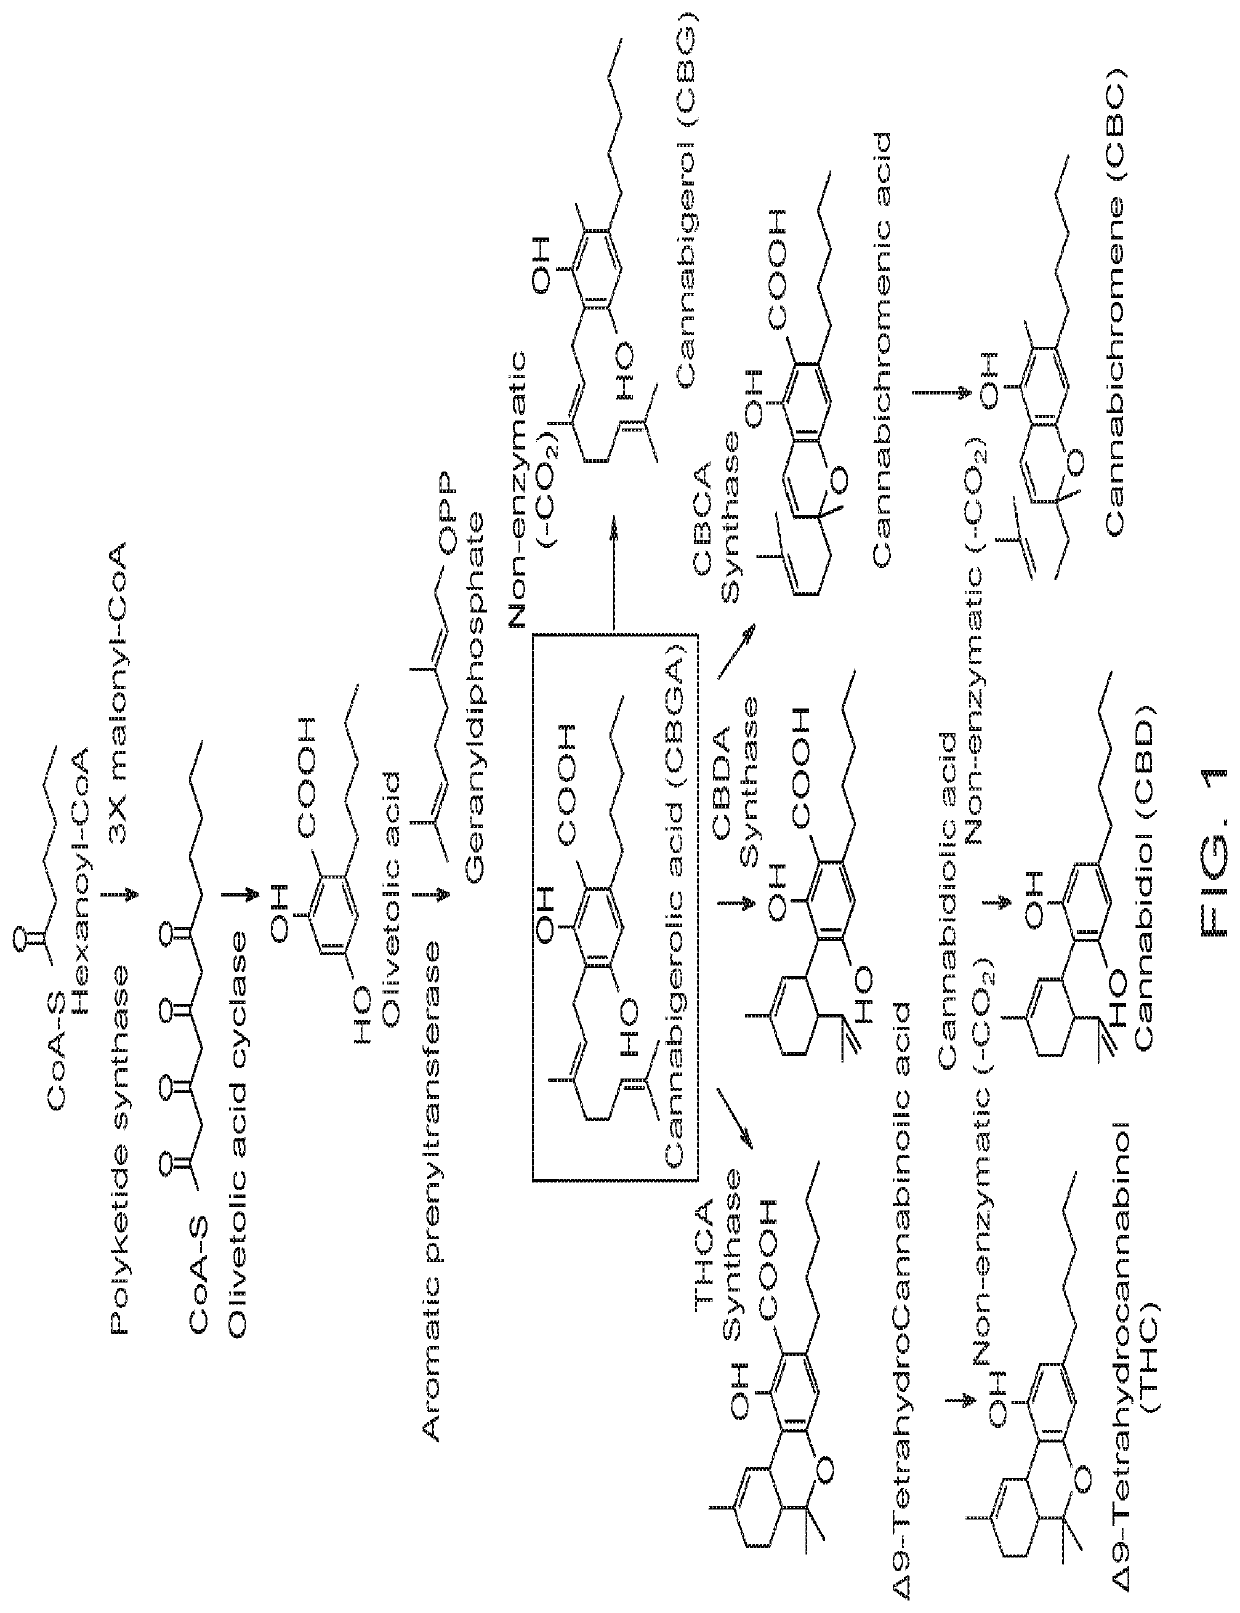 Microorganisms and Methods for the Fermentation of Cannabinoids